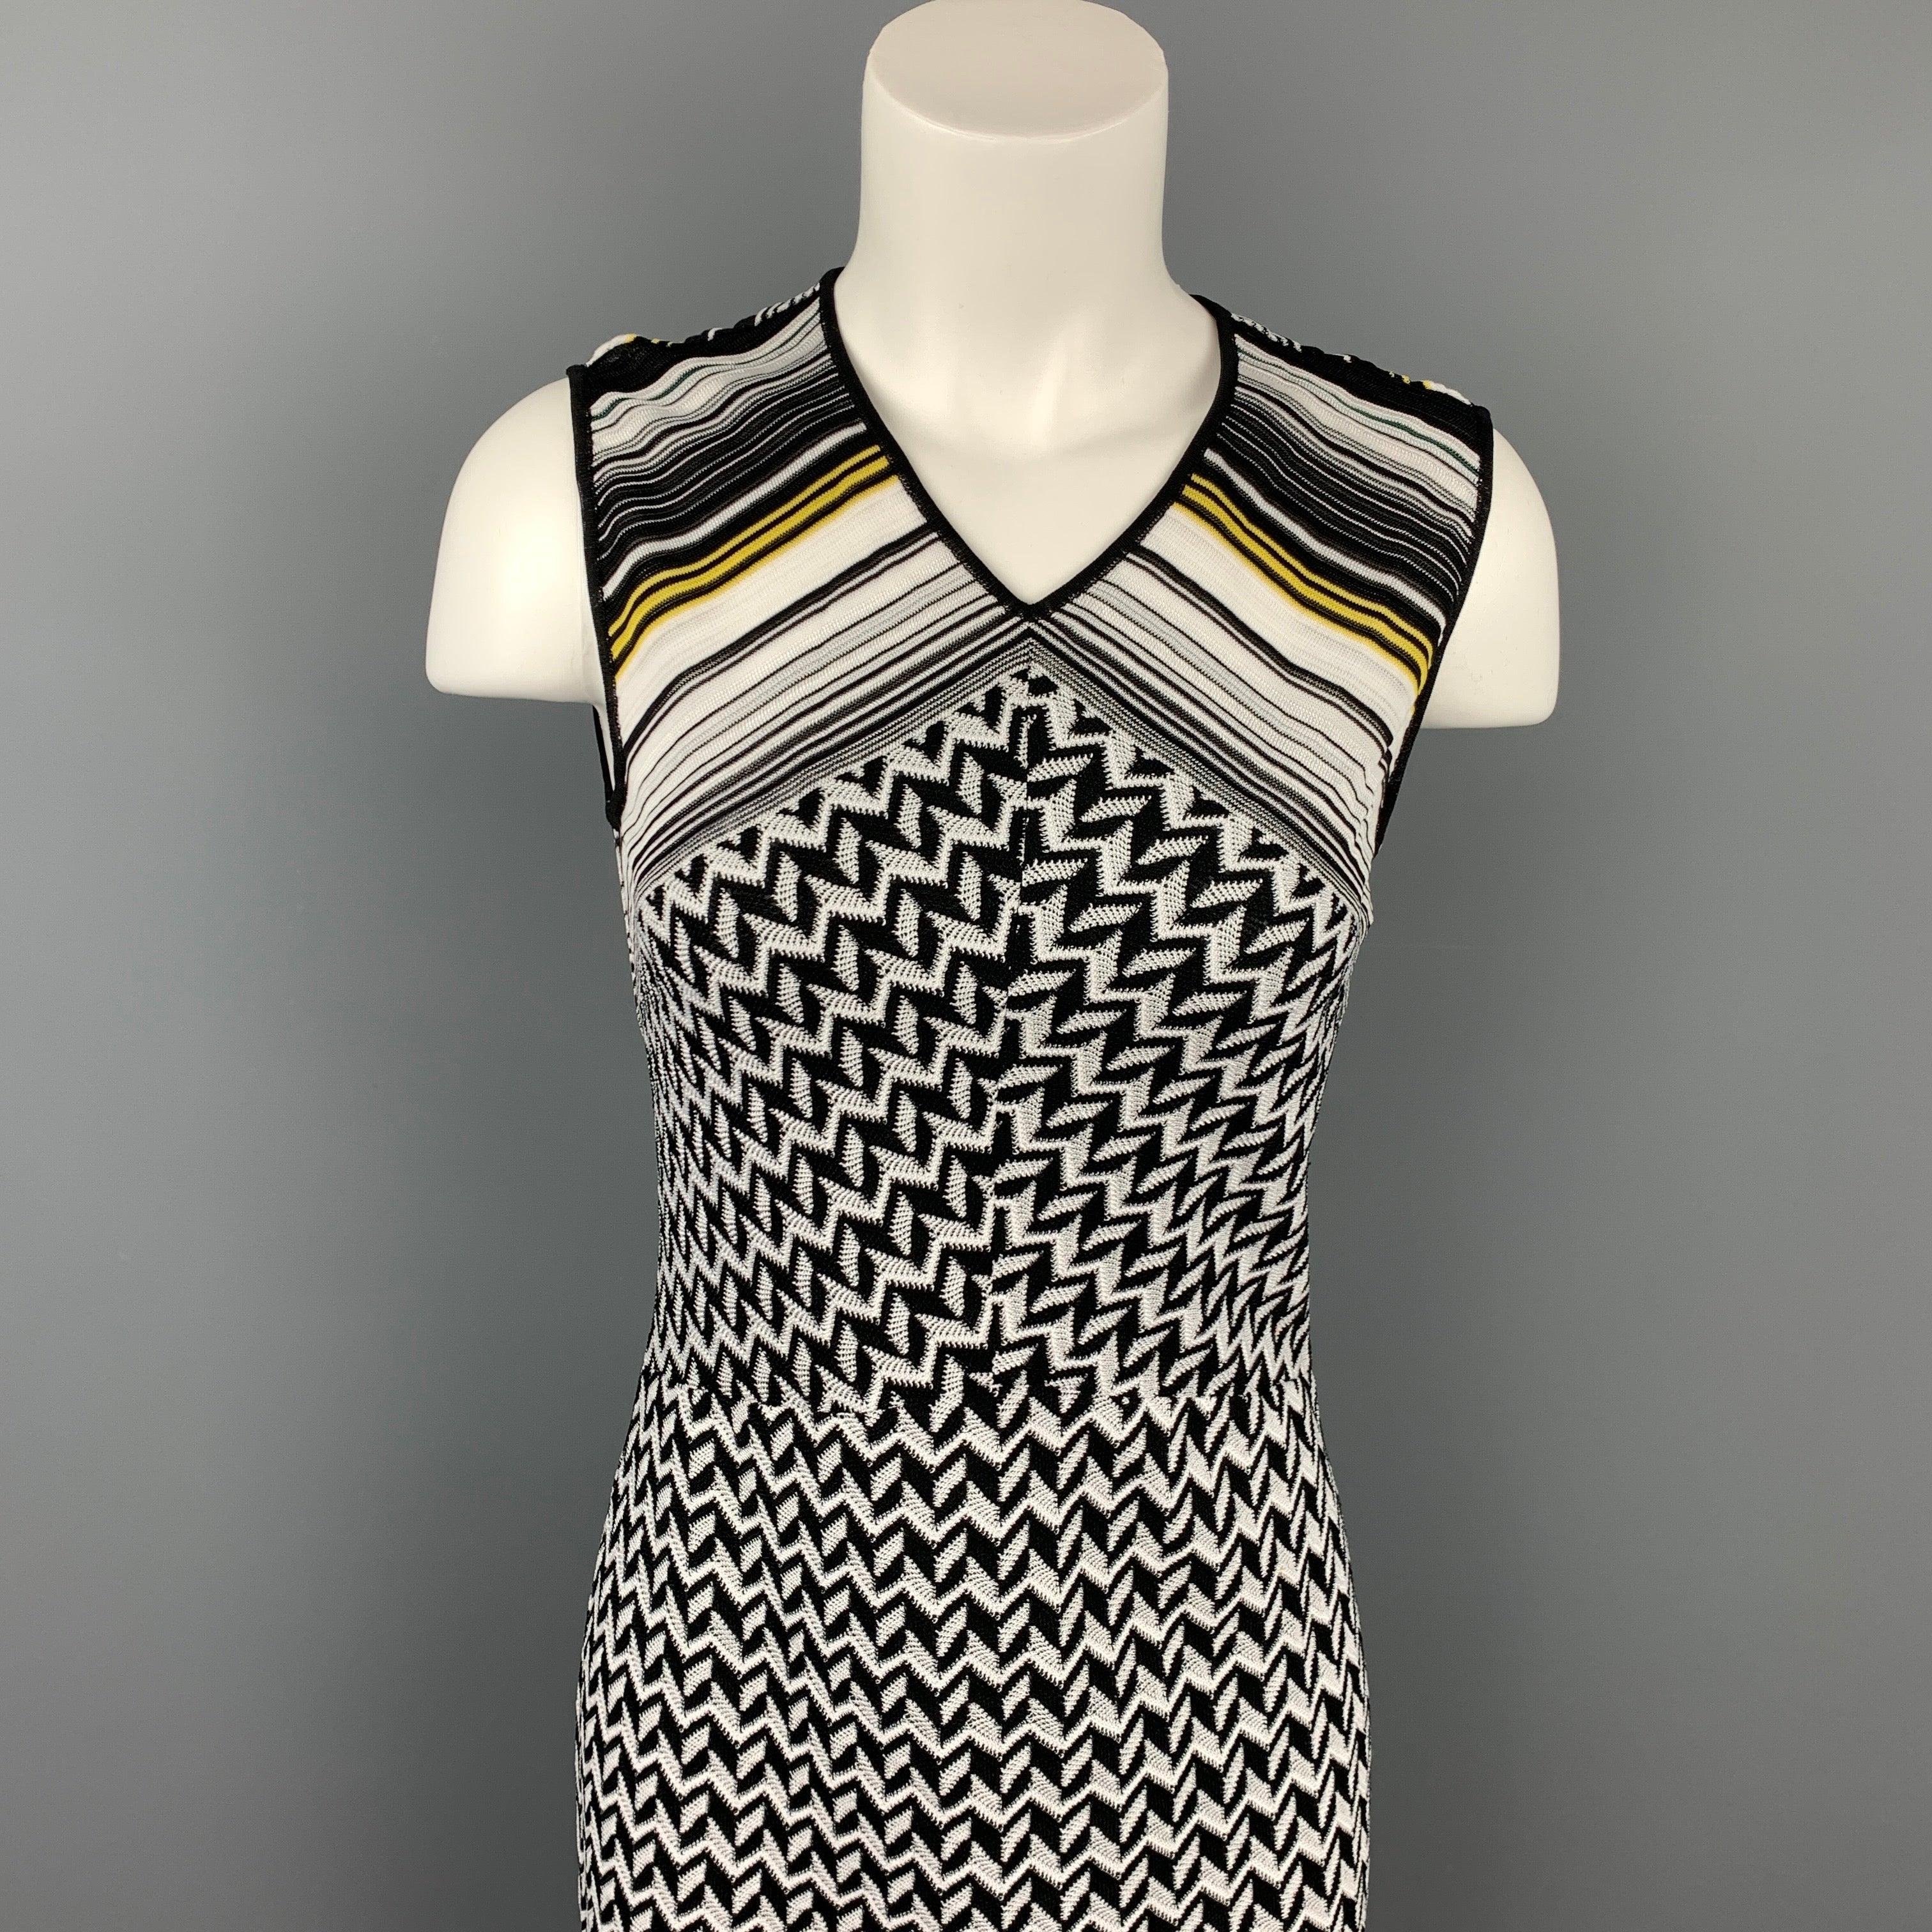 MISSONI dress comes in a black & white zig zag print material featuring a shift style, sleeveless, and a back zip up closure. Made in Italy.Very Good
Pre-Owned Condition. 

Marked:   No size marked 

Measurements: 
 
Shoulder: 14 inches  Bust: 28